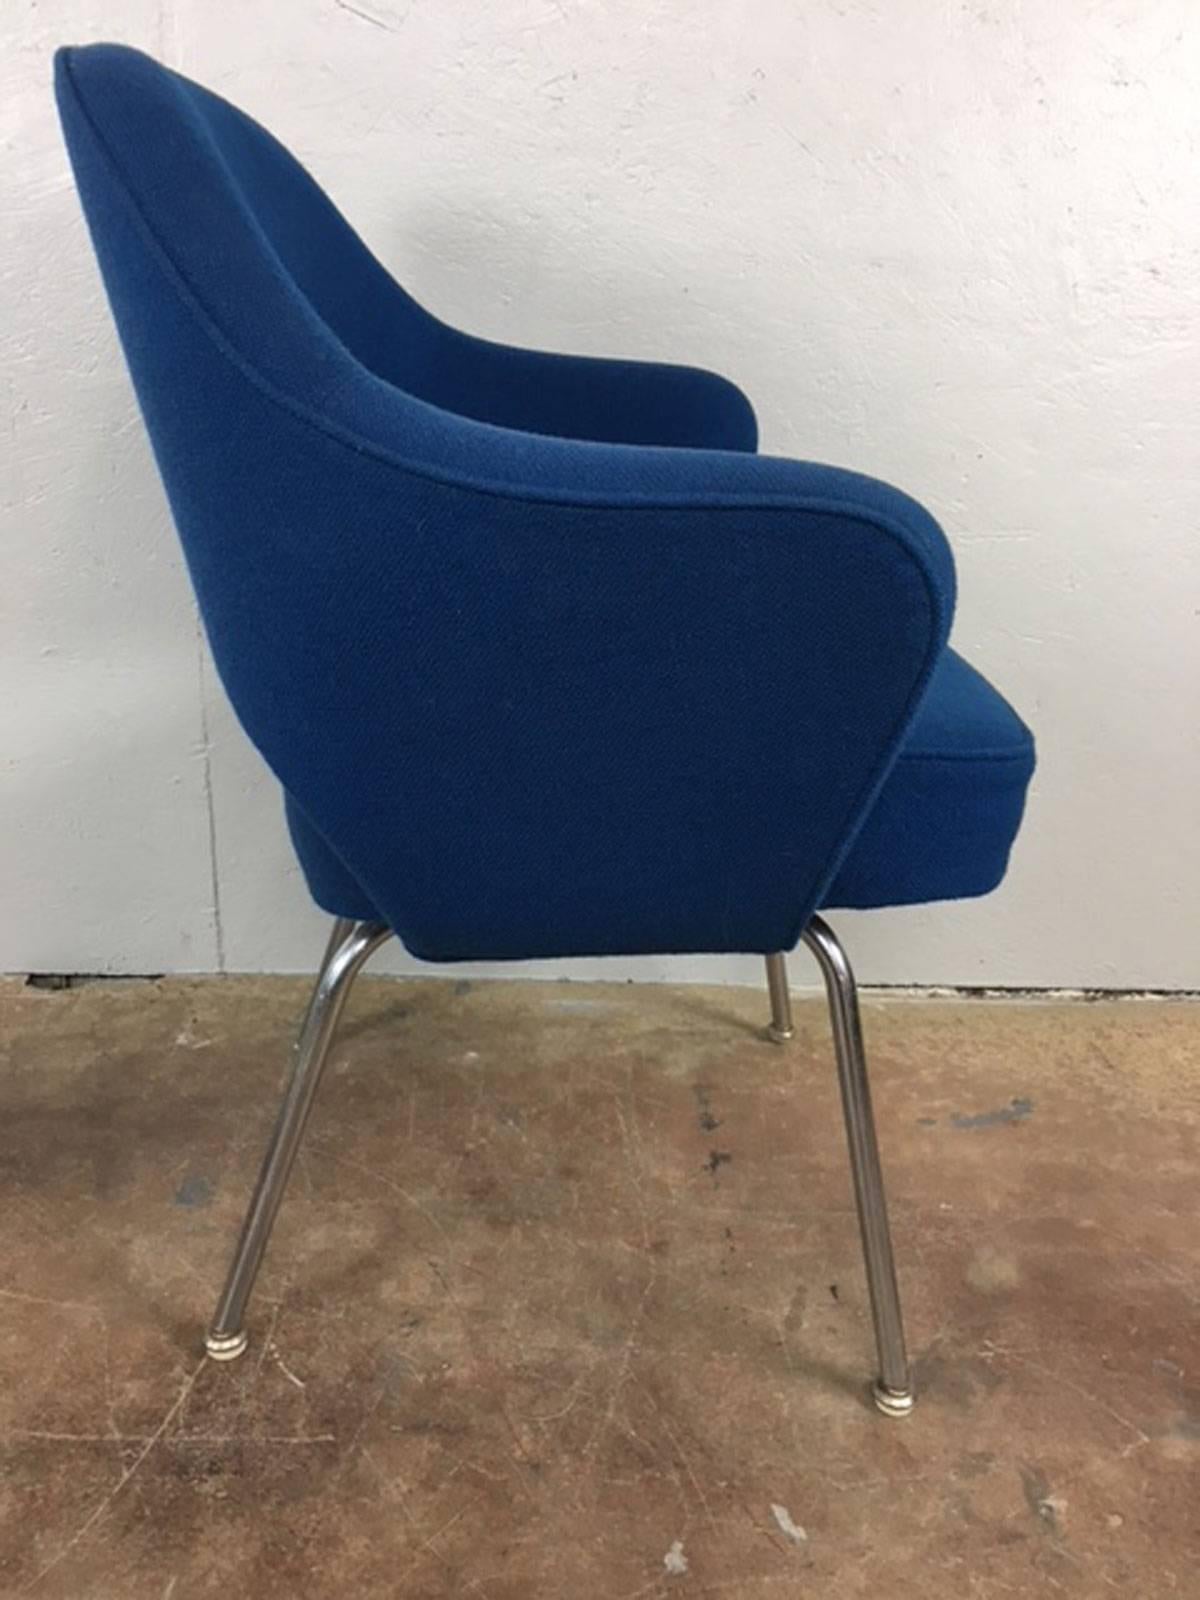 Pair of Eero Saarinen upholstered executive chairs in royal blue. Knoll. Very good condition. No rips, tears, holes, or unusual wear. Foam is in very good condition. 

Measures: Seat height is 17.5 inches.